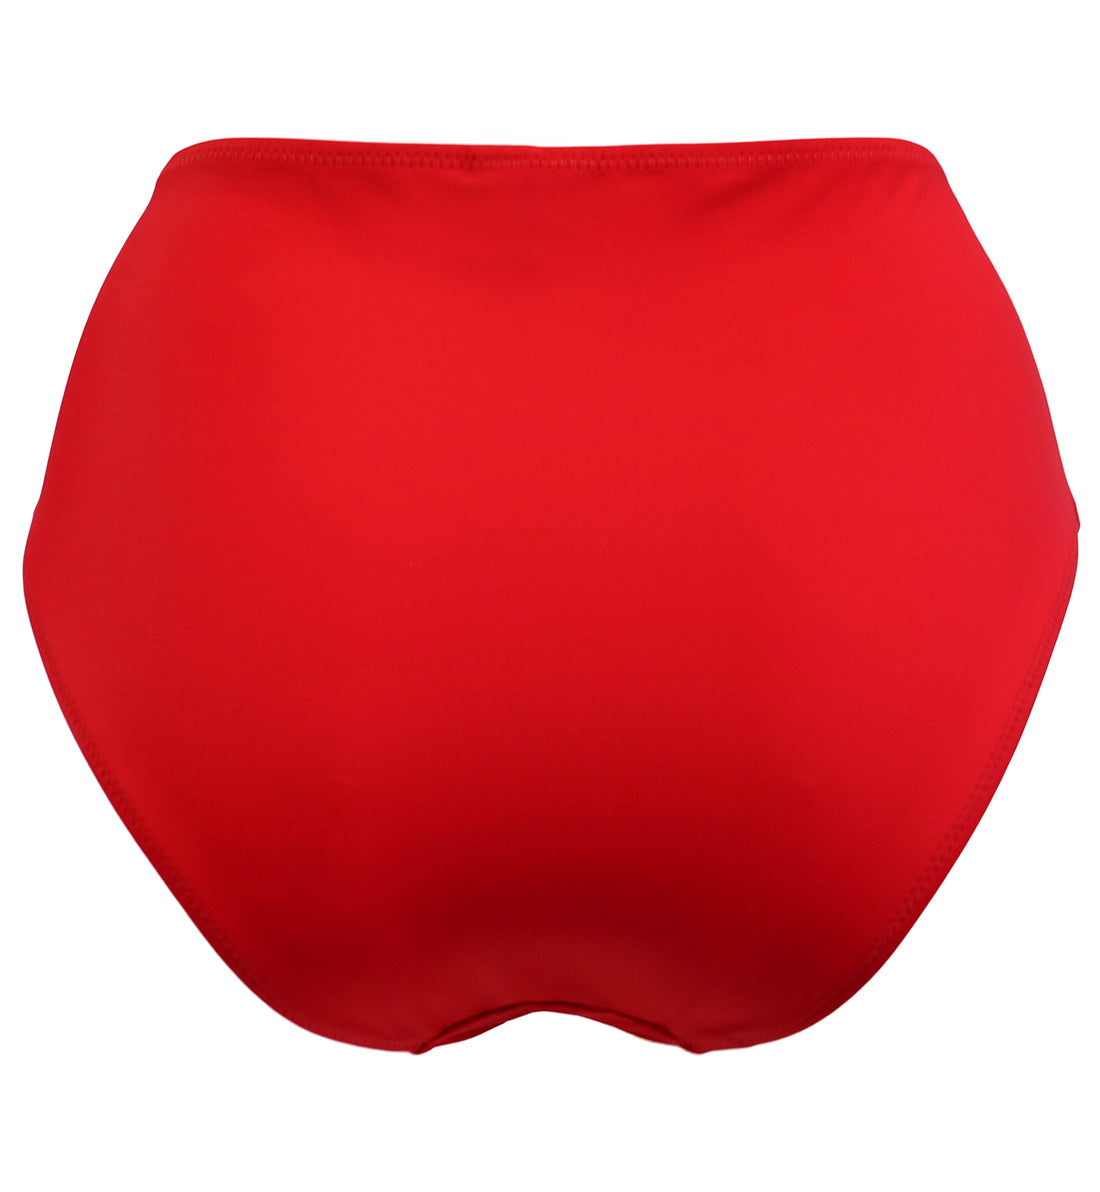 Pour Moi Space High Leg High Waist Control Swim Brief (36046),Small,Red - Red,Small